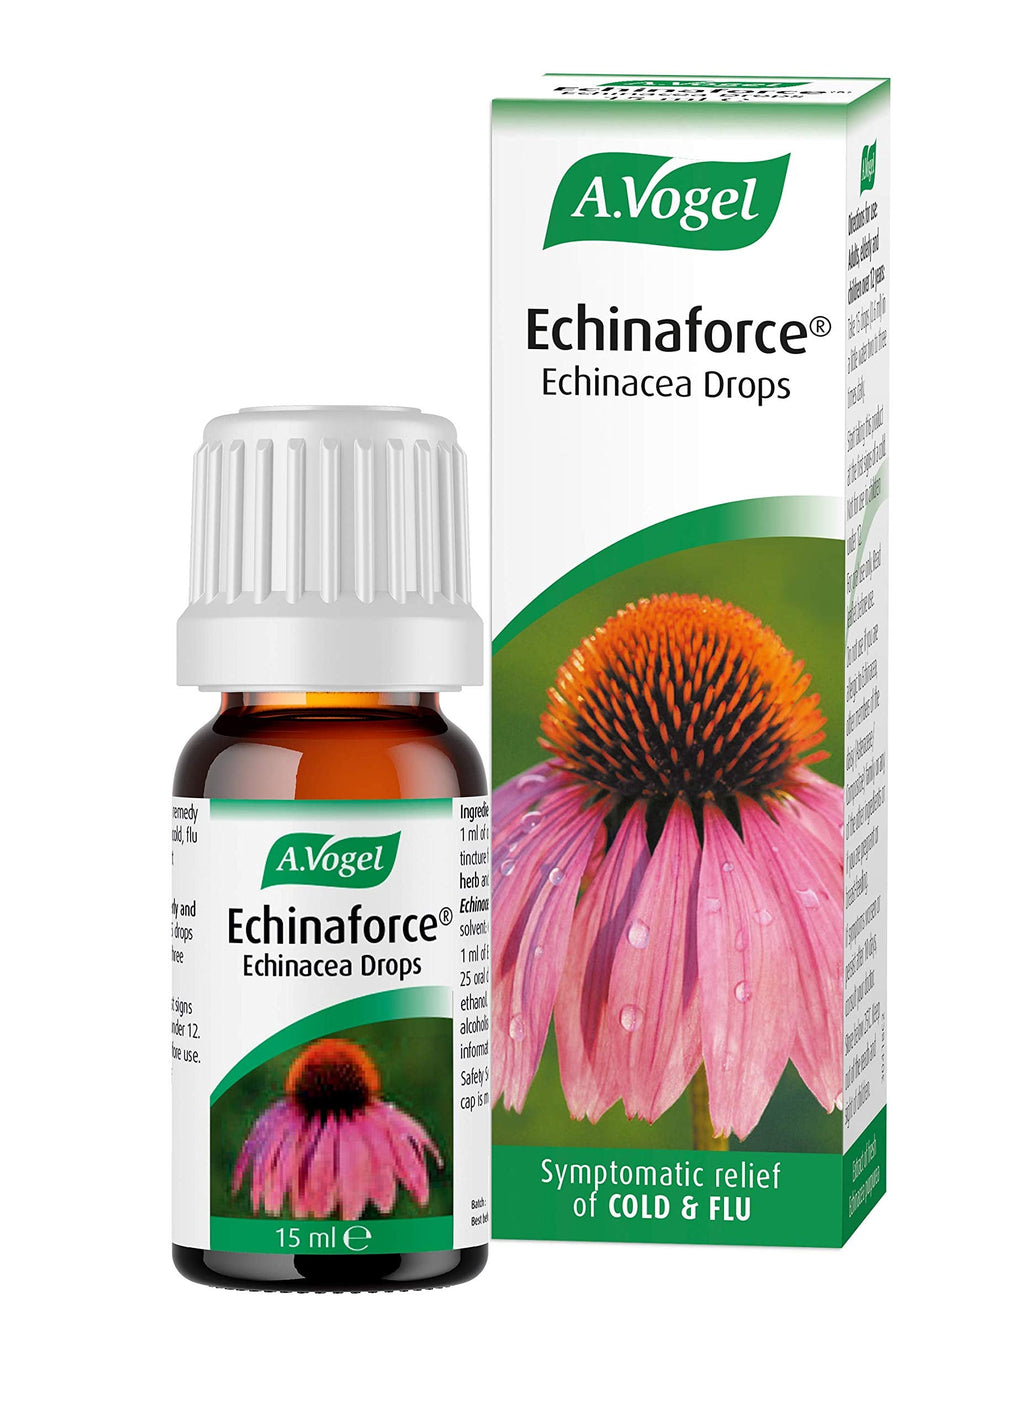 [Australia] - A.Vogel Echinaforce Echinacea Drops | Relieves Cold & Flu Symptoms by Strengthening the Immune System |15ml 15 ml (Pack of 1) 